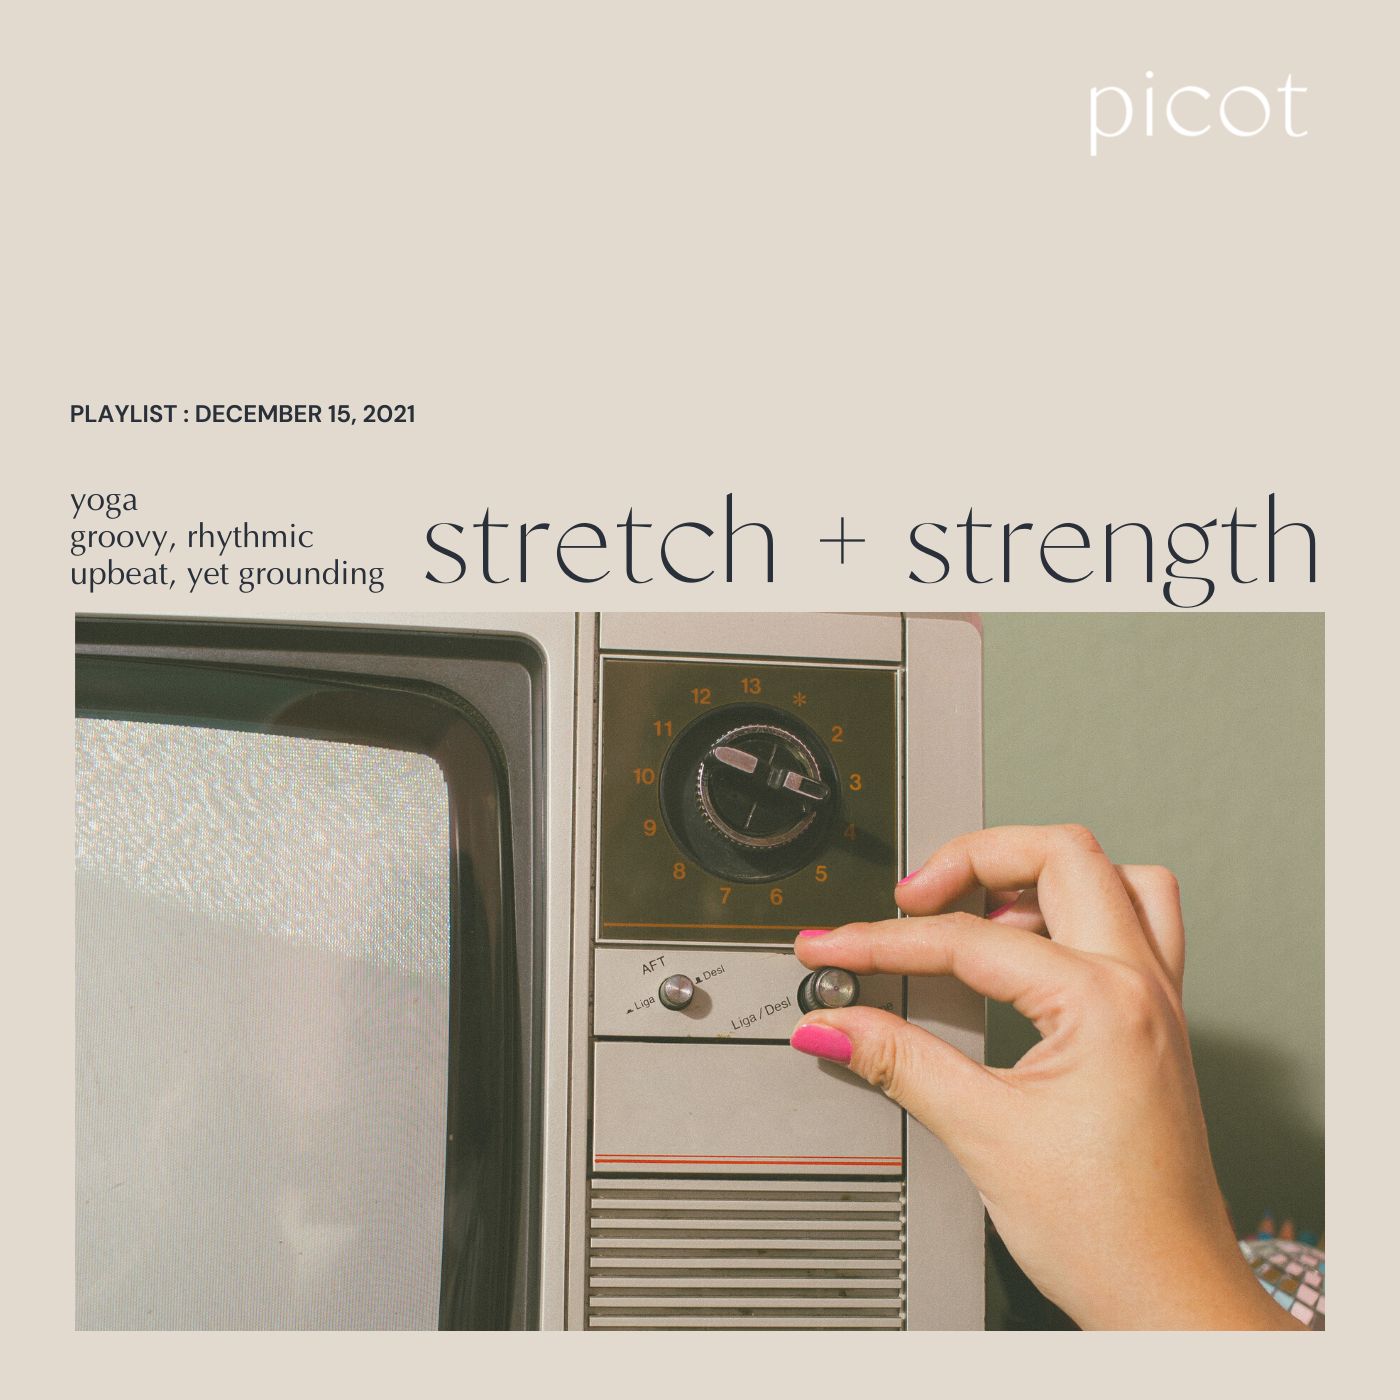 60 minute energizing playlist for Yoga stretch and strength by Picot Collective